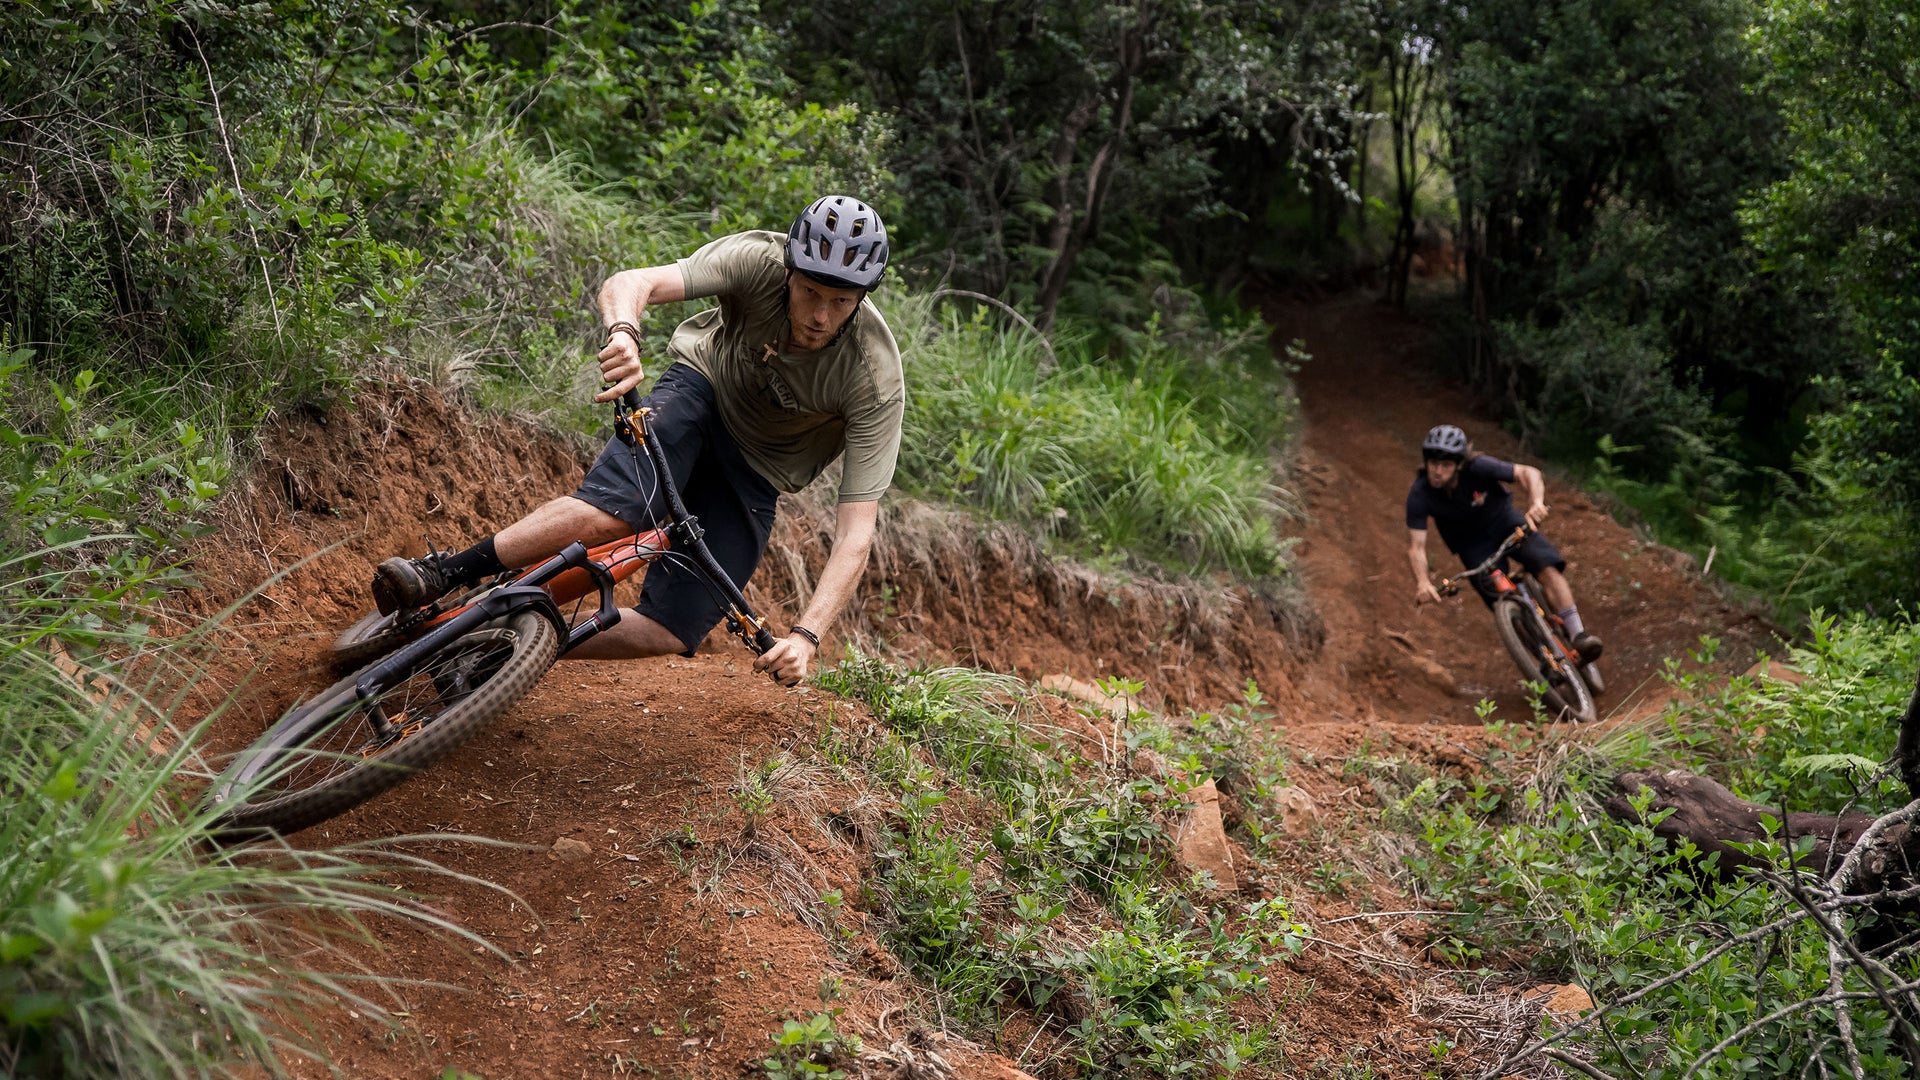 Load video: He builds because riding is also a part of his expression. It becomes this full picture where he doesn&#39;t just build for other people to enjoy—he builds it because he also needs to express himself in that way through his riding.” – Fanie Kok, Hylly’s brother-in-law Matt Hunter went to South Africa to ride some local trails in Karkloof before moving on to the Drakensberg. What he found was a reminder of what a connection to homeland means and how people can express it, through the eyes of local trail builder, Hylton Turvey. The end result shows us all that the fruit of any trail builder’s devotion is a connection to the trail, the ride, and more stoke for riders to enjoy. NOTE: This video is a combination of multiple days riding in both Karkloof, on trails Hylly built, and footage of the crew exploring new trails together in the foothills of the Drakensberg.